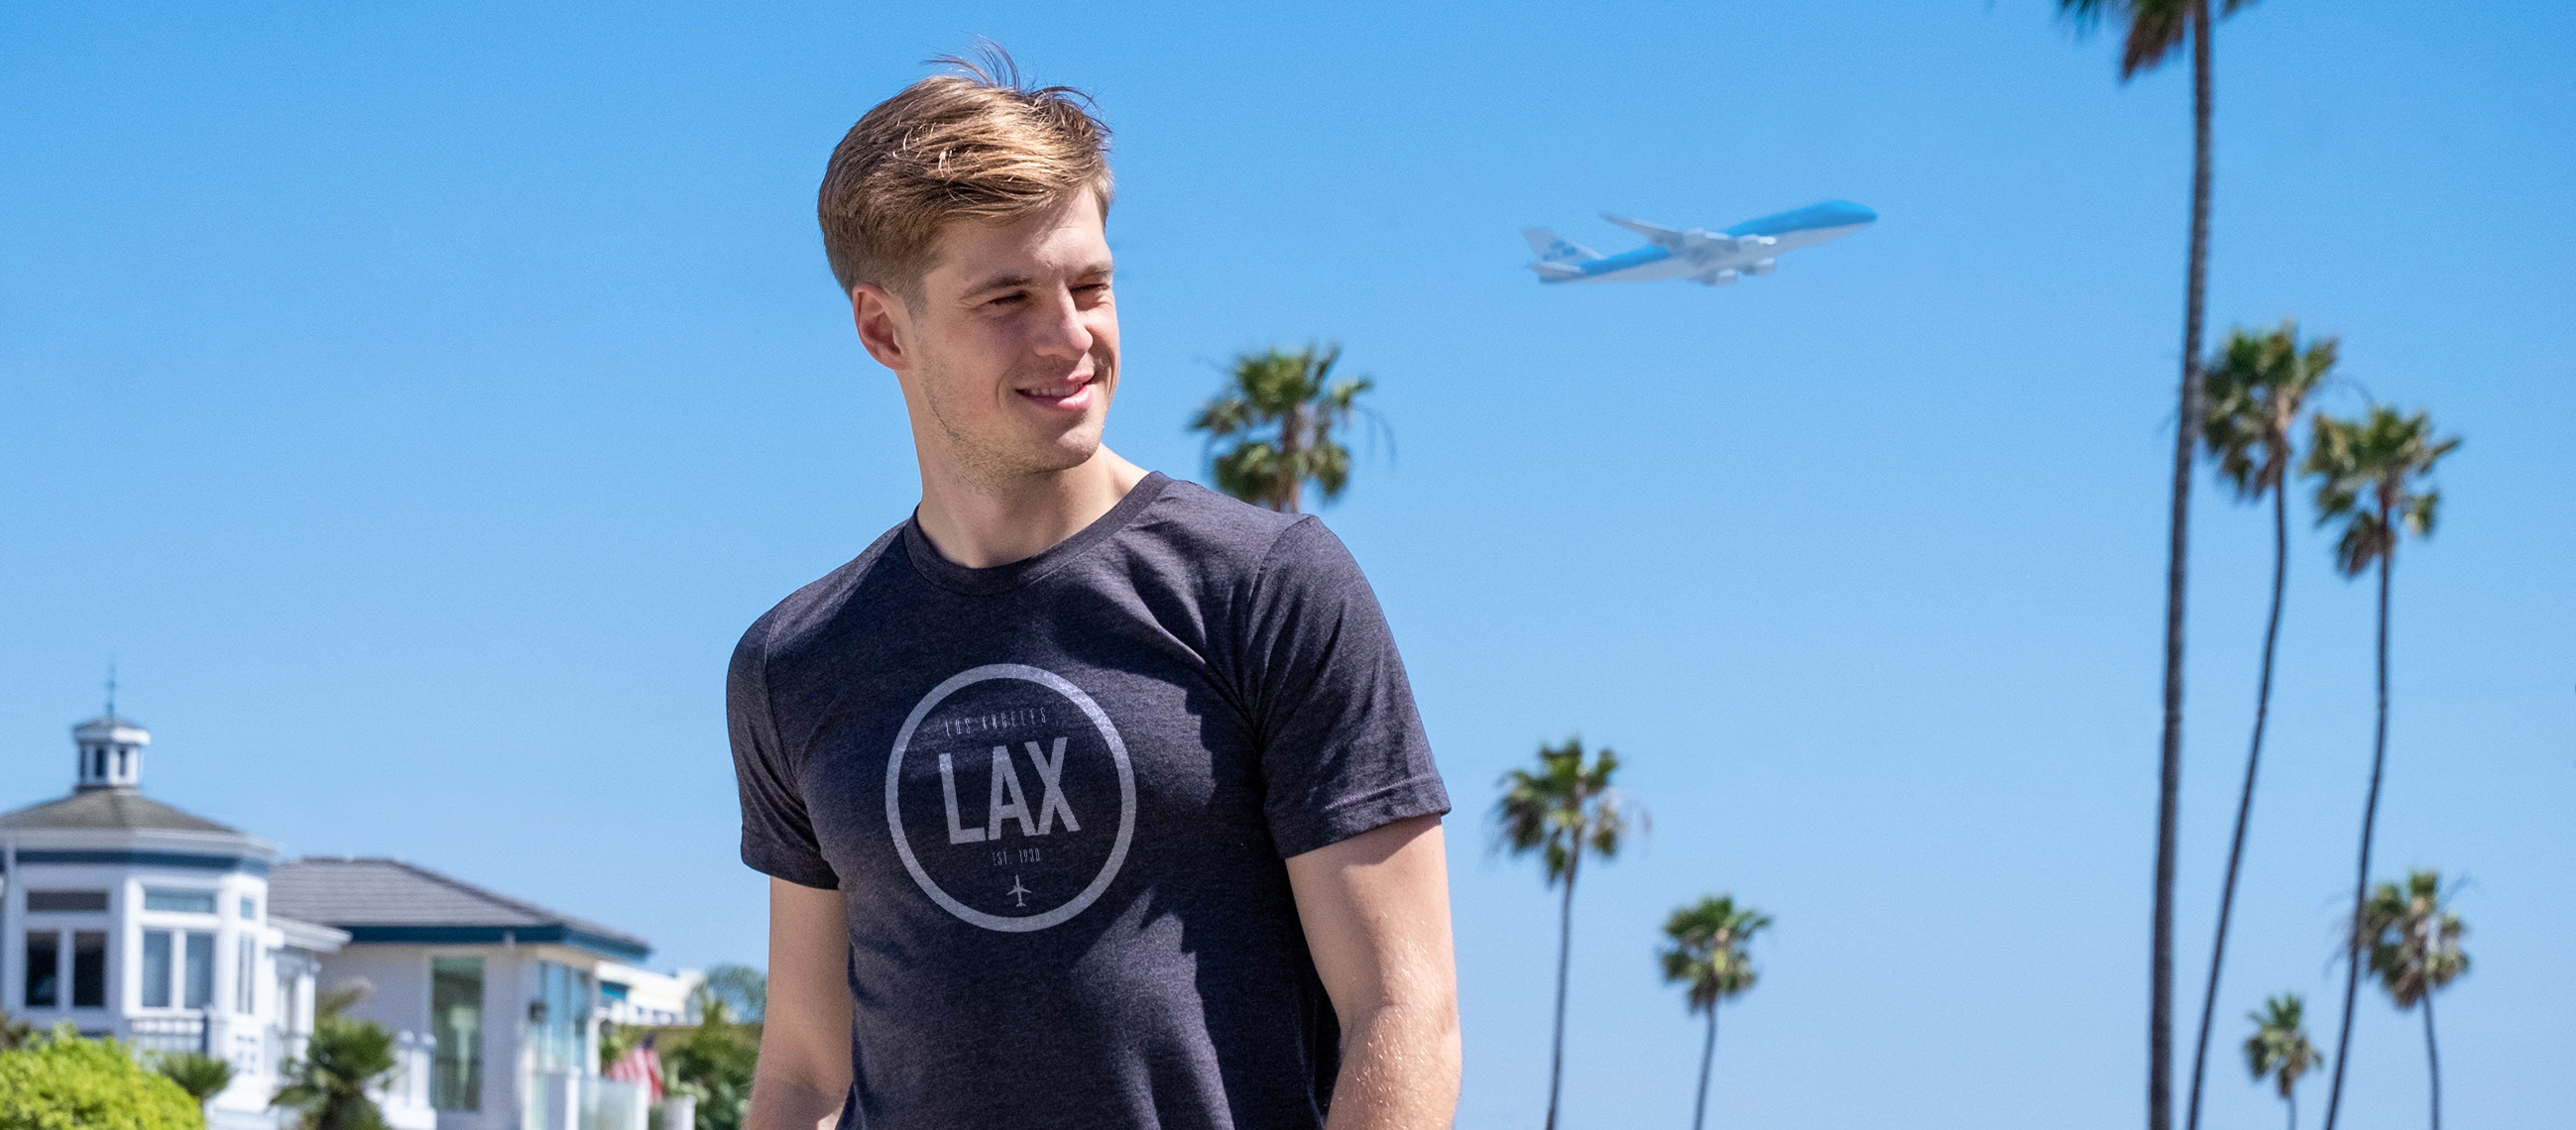 LAX Los Angeles Airport Code Shirt with Airplane taking off.